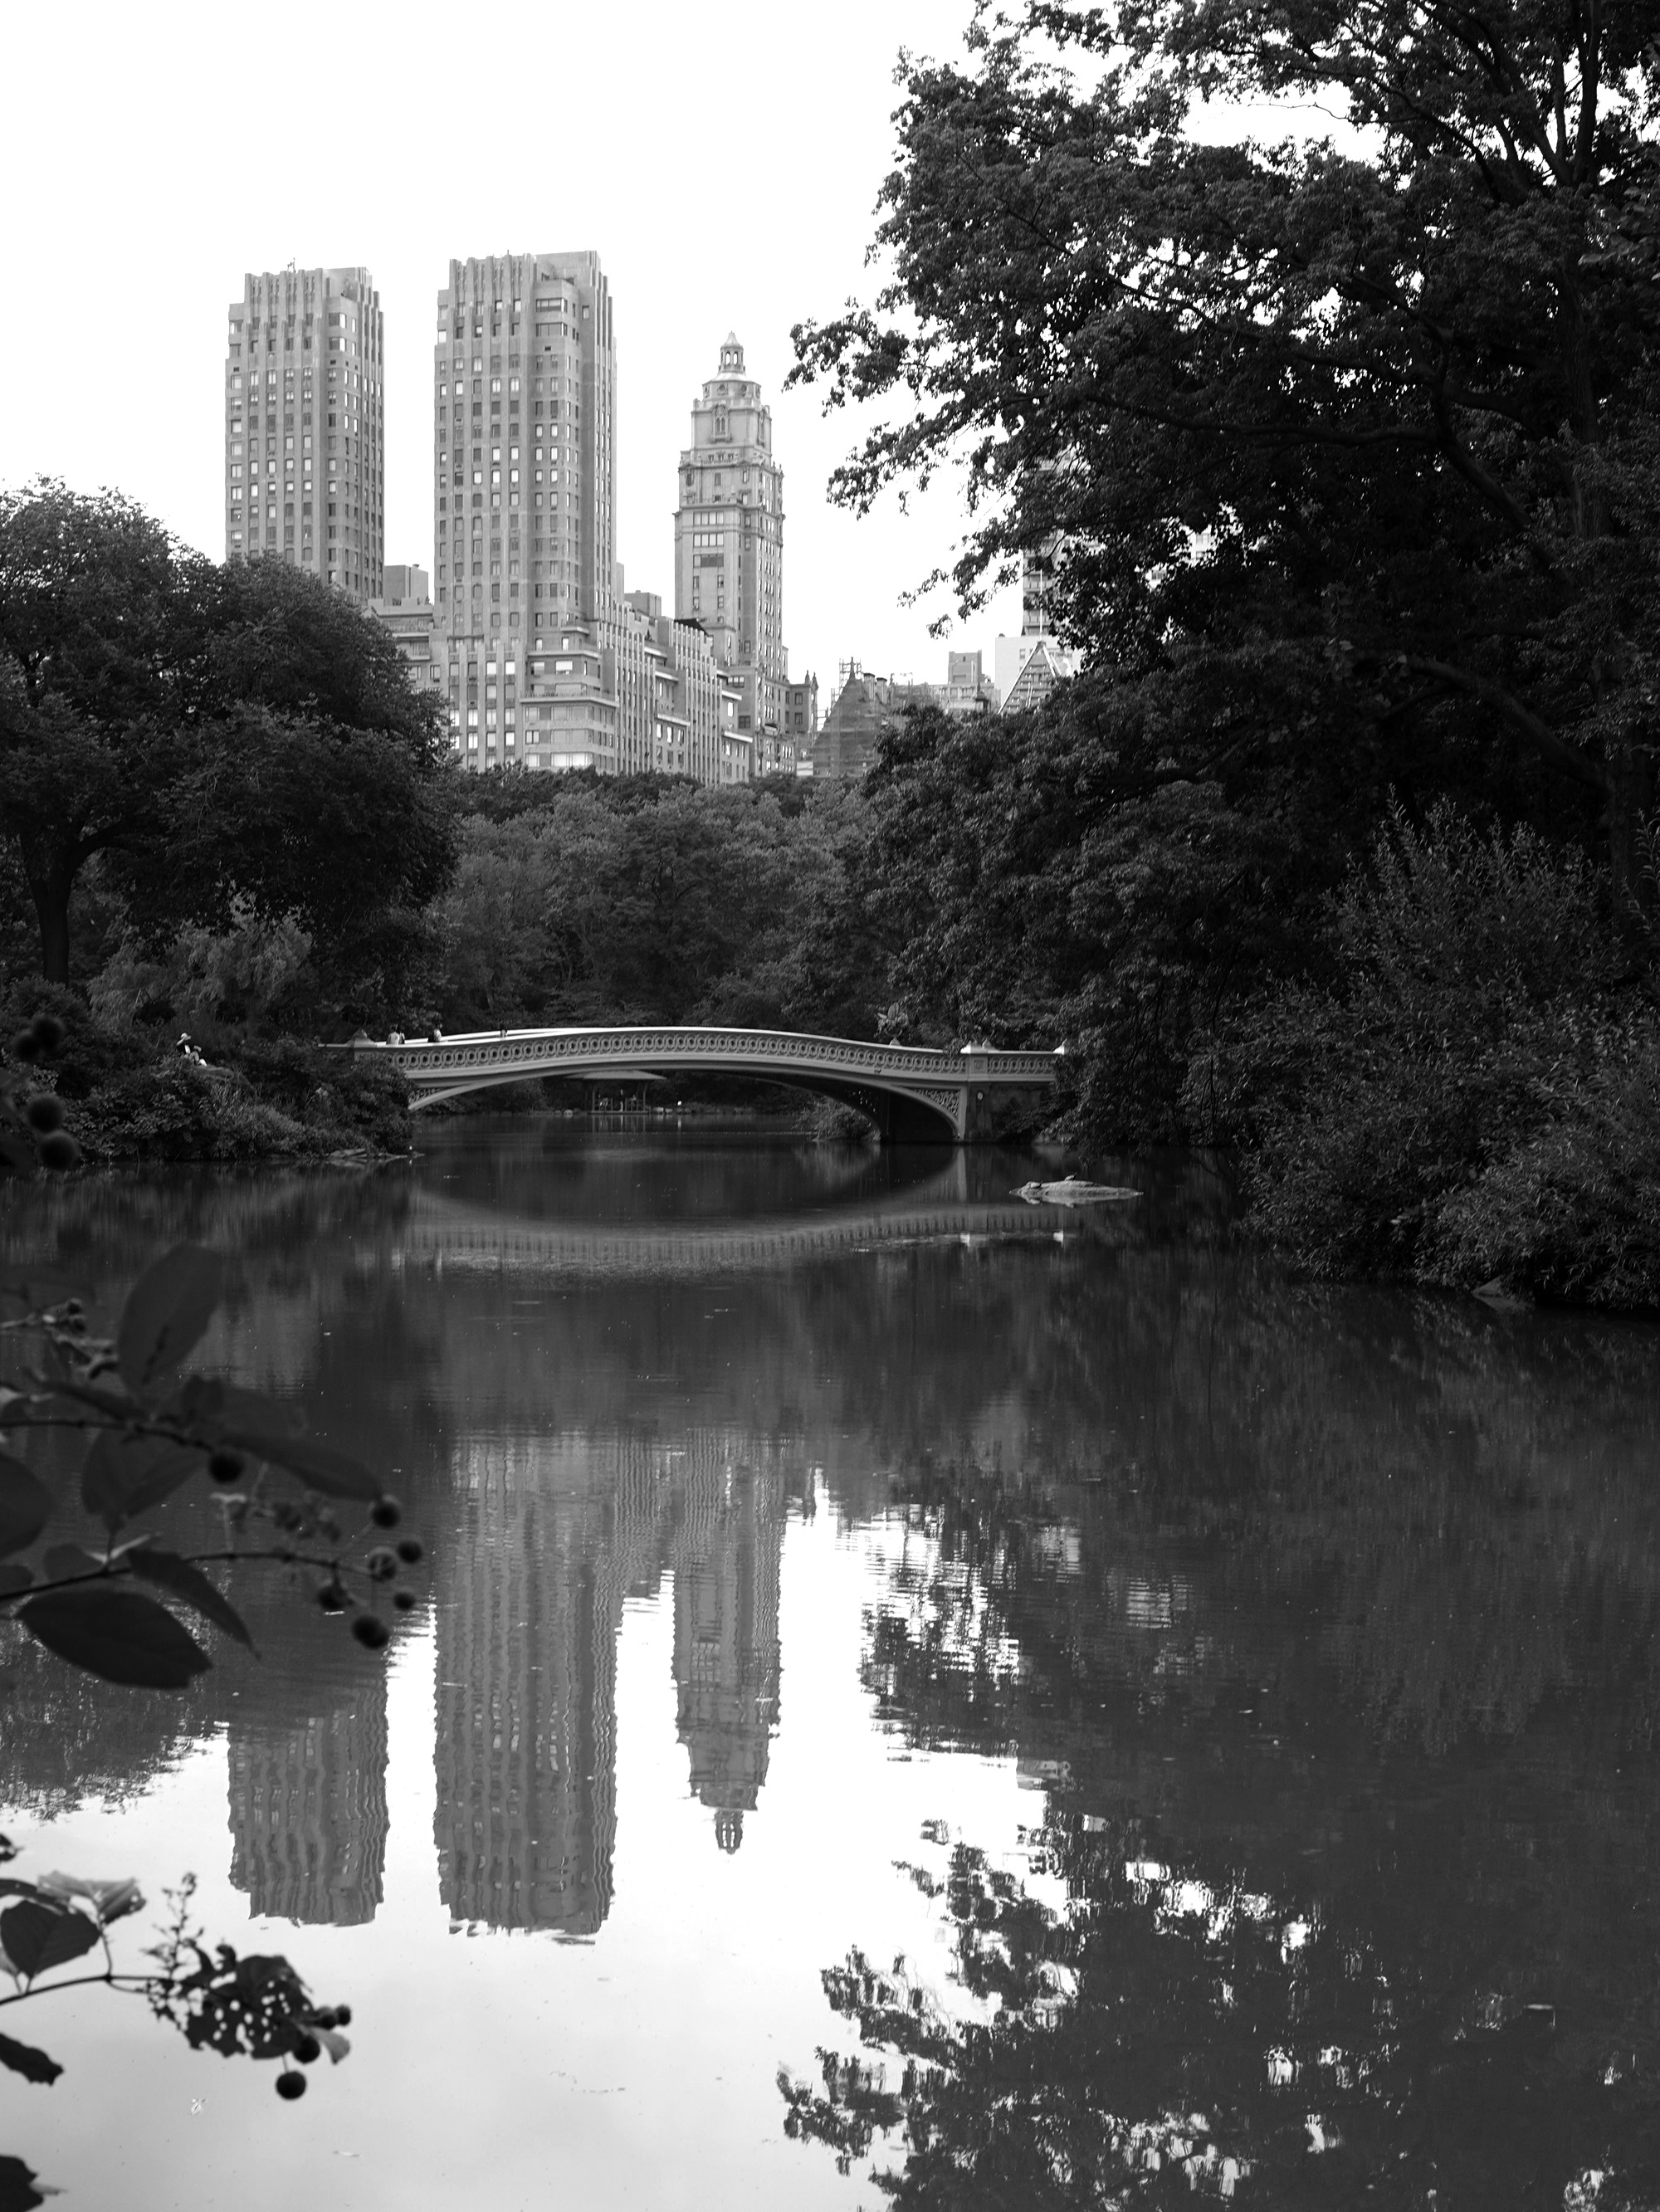 The Lake, Central Park, New York City / Darker than Green